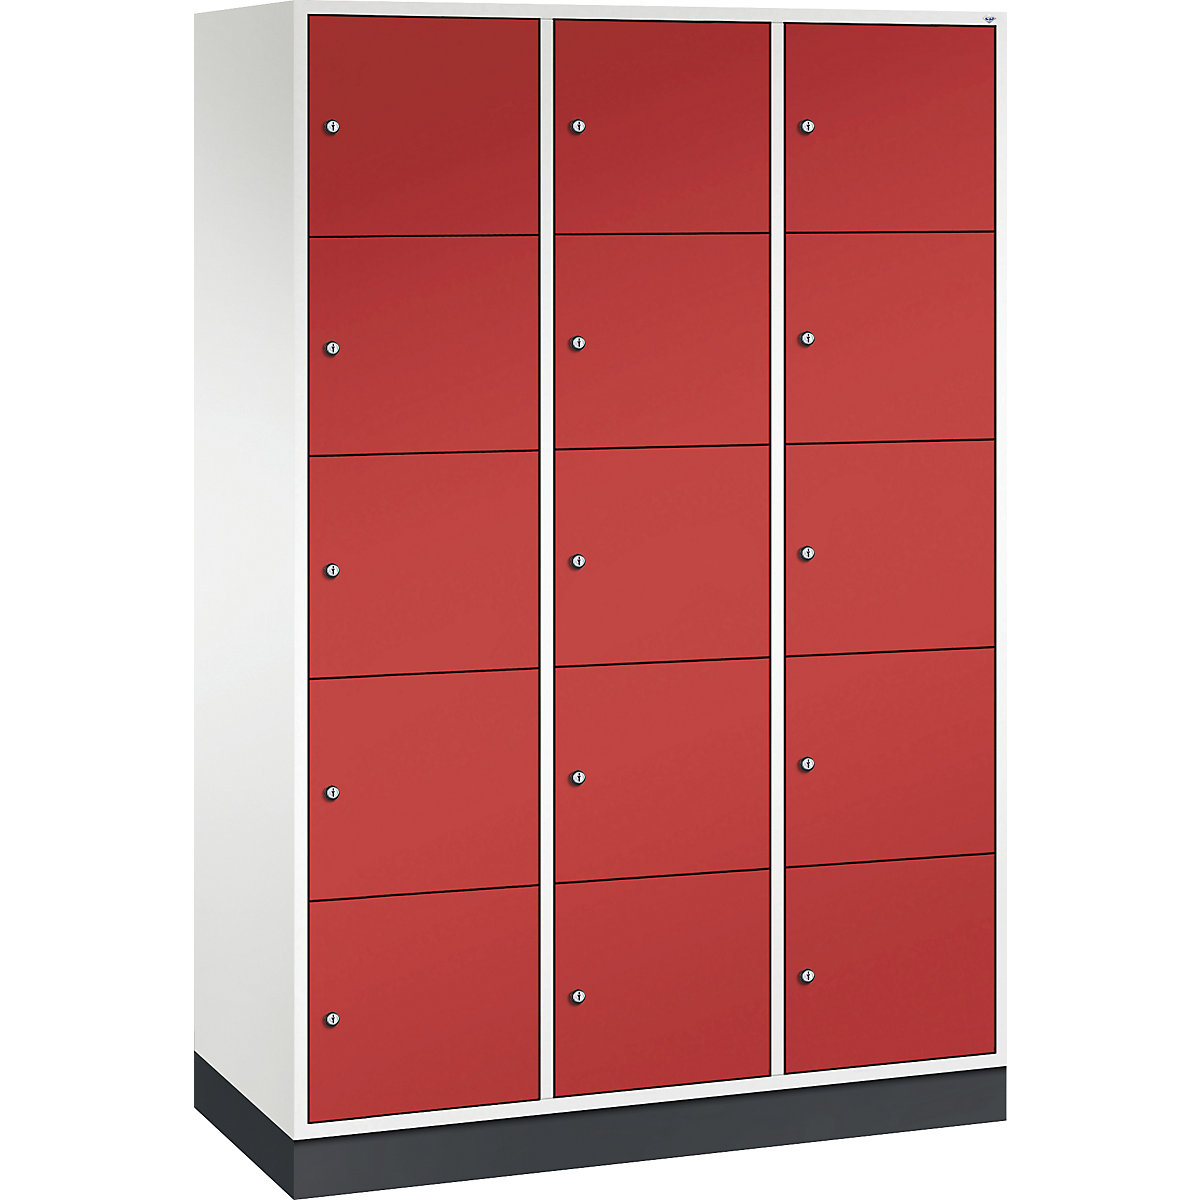 INTRO steel compartment locker, compartment height 345 mm – C+P, WxD 1220 x 500 mm, 15 compartments, pure white body, flame red doors